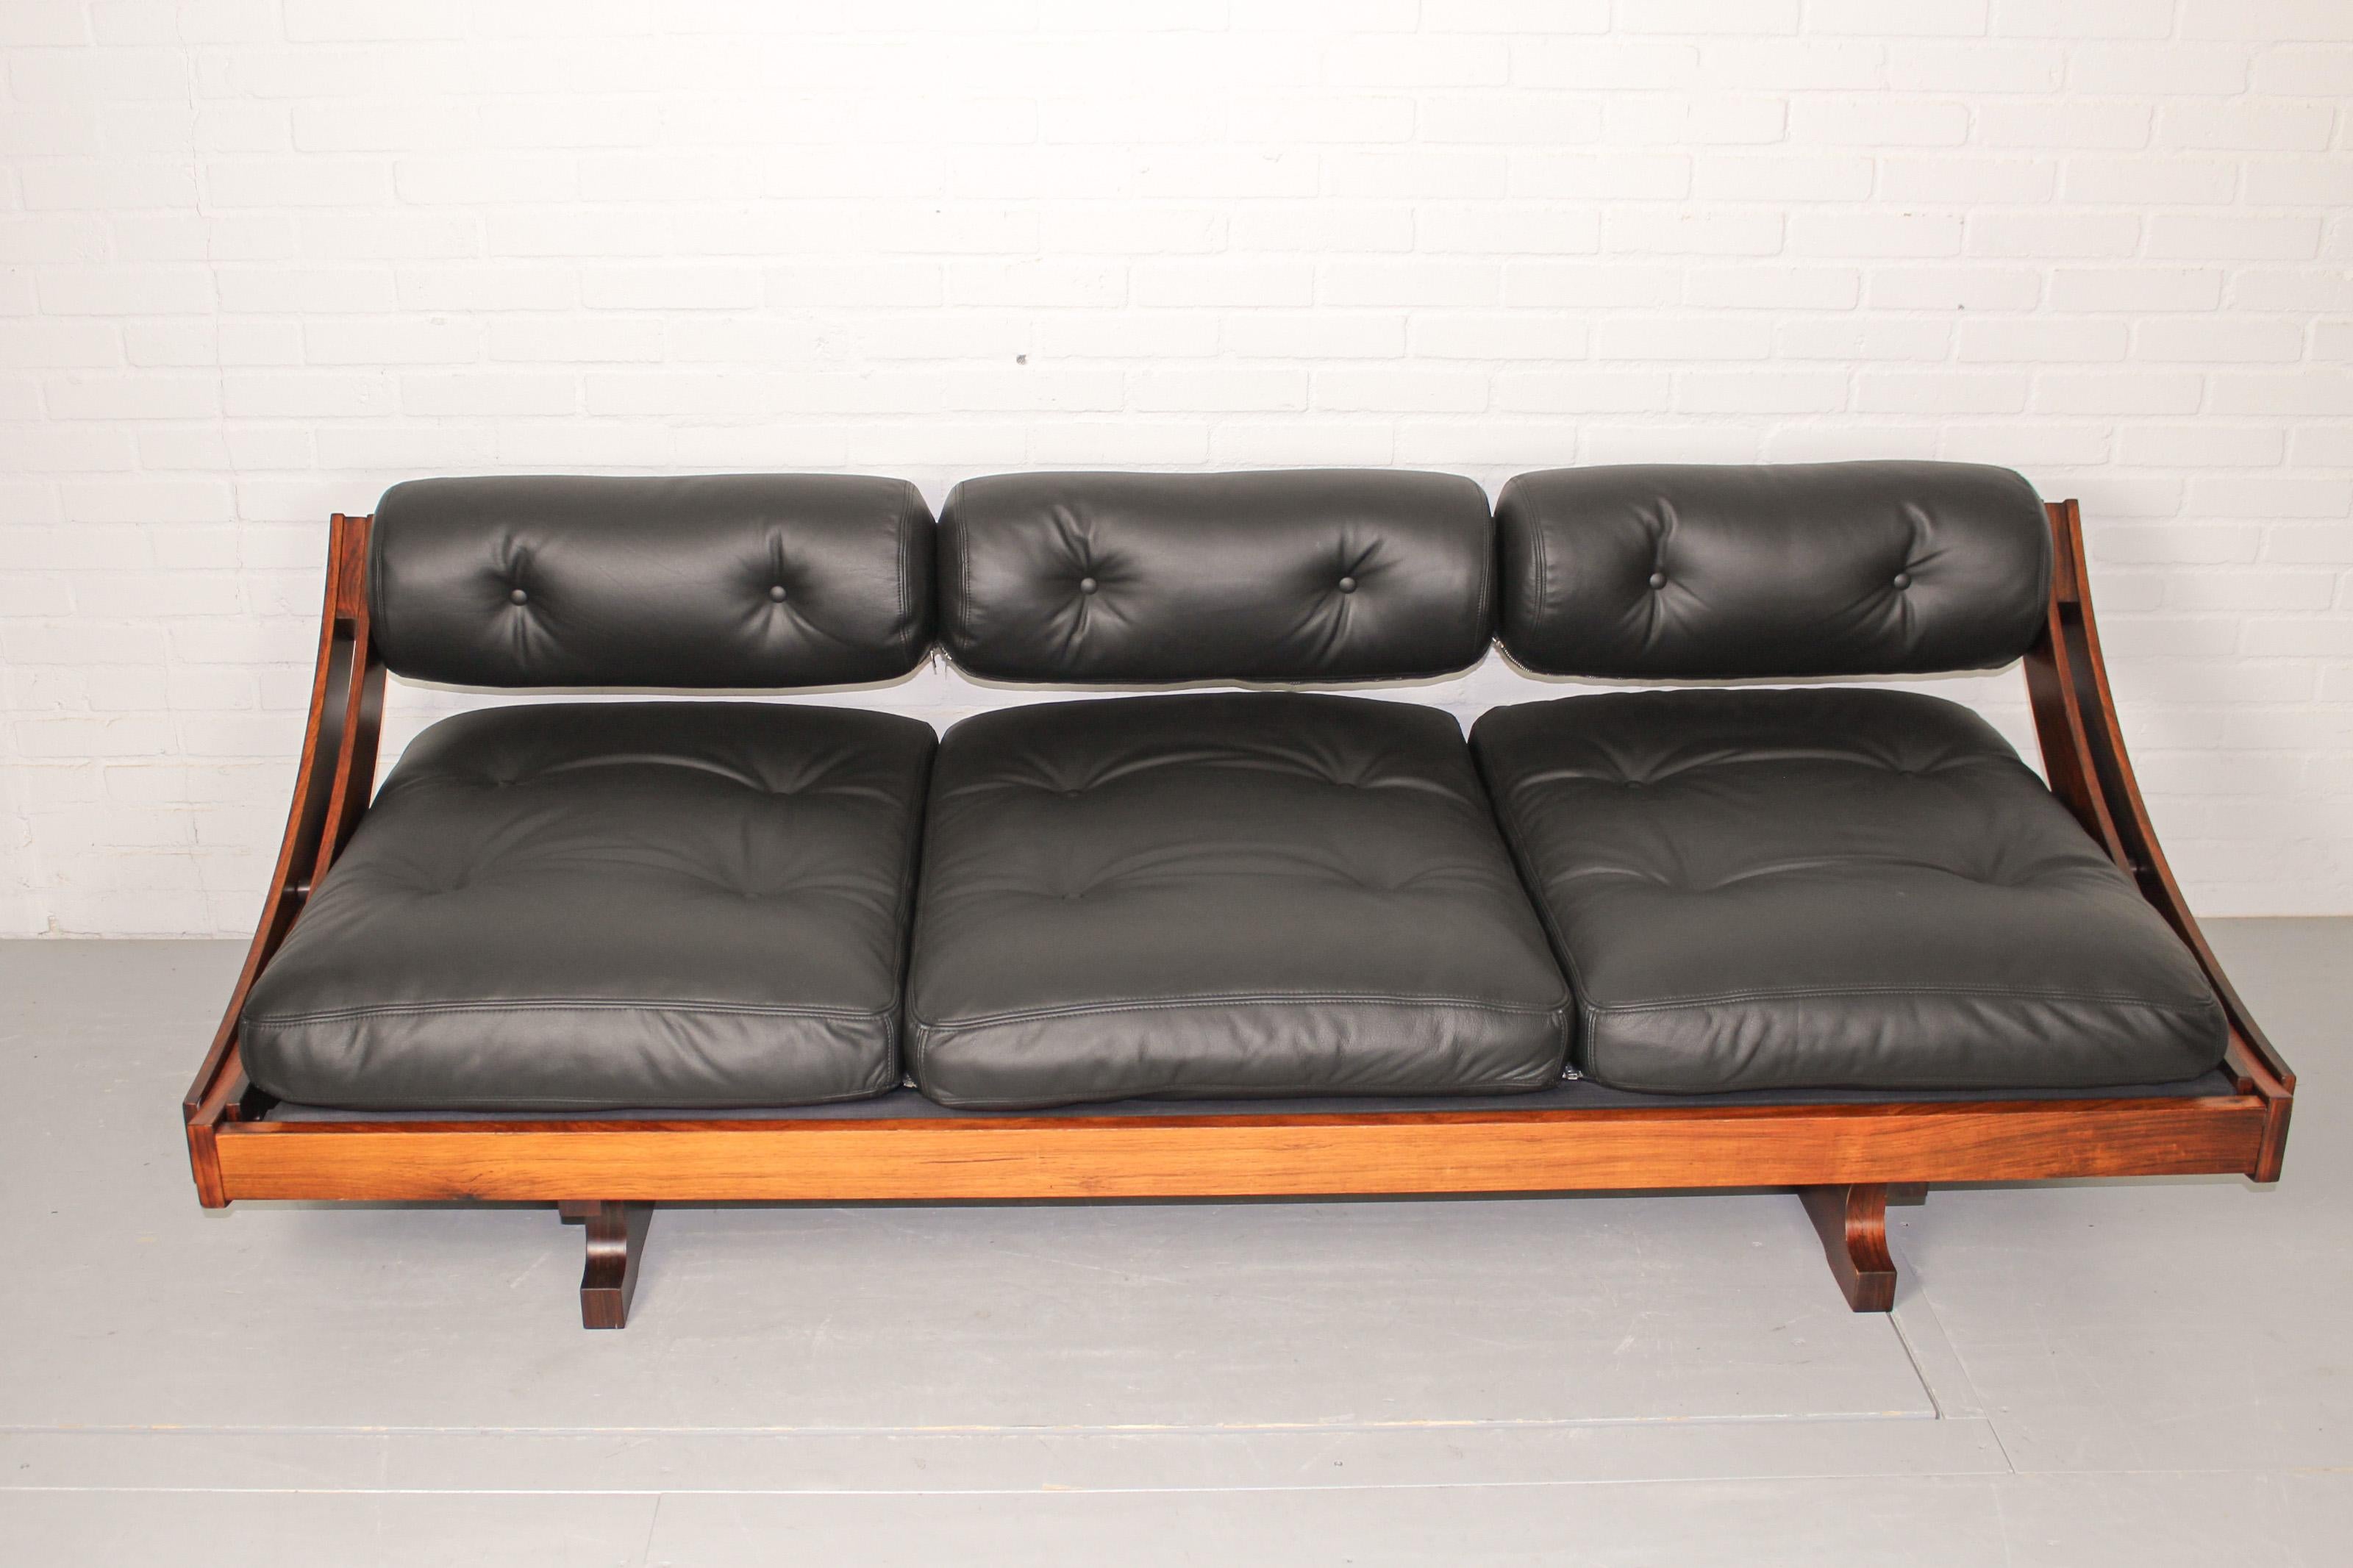 Rosewood Daybed Sofa GS 195 by Gianni Songia for Sormani in New Black Leather 3